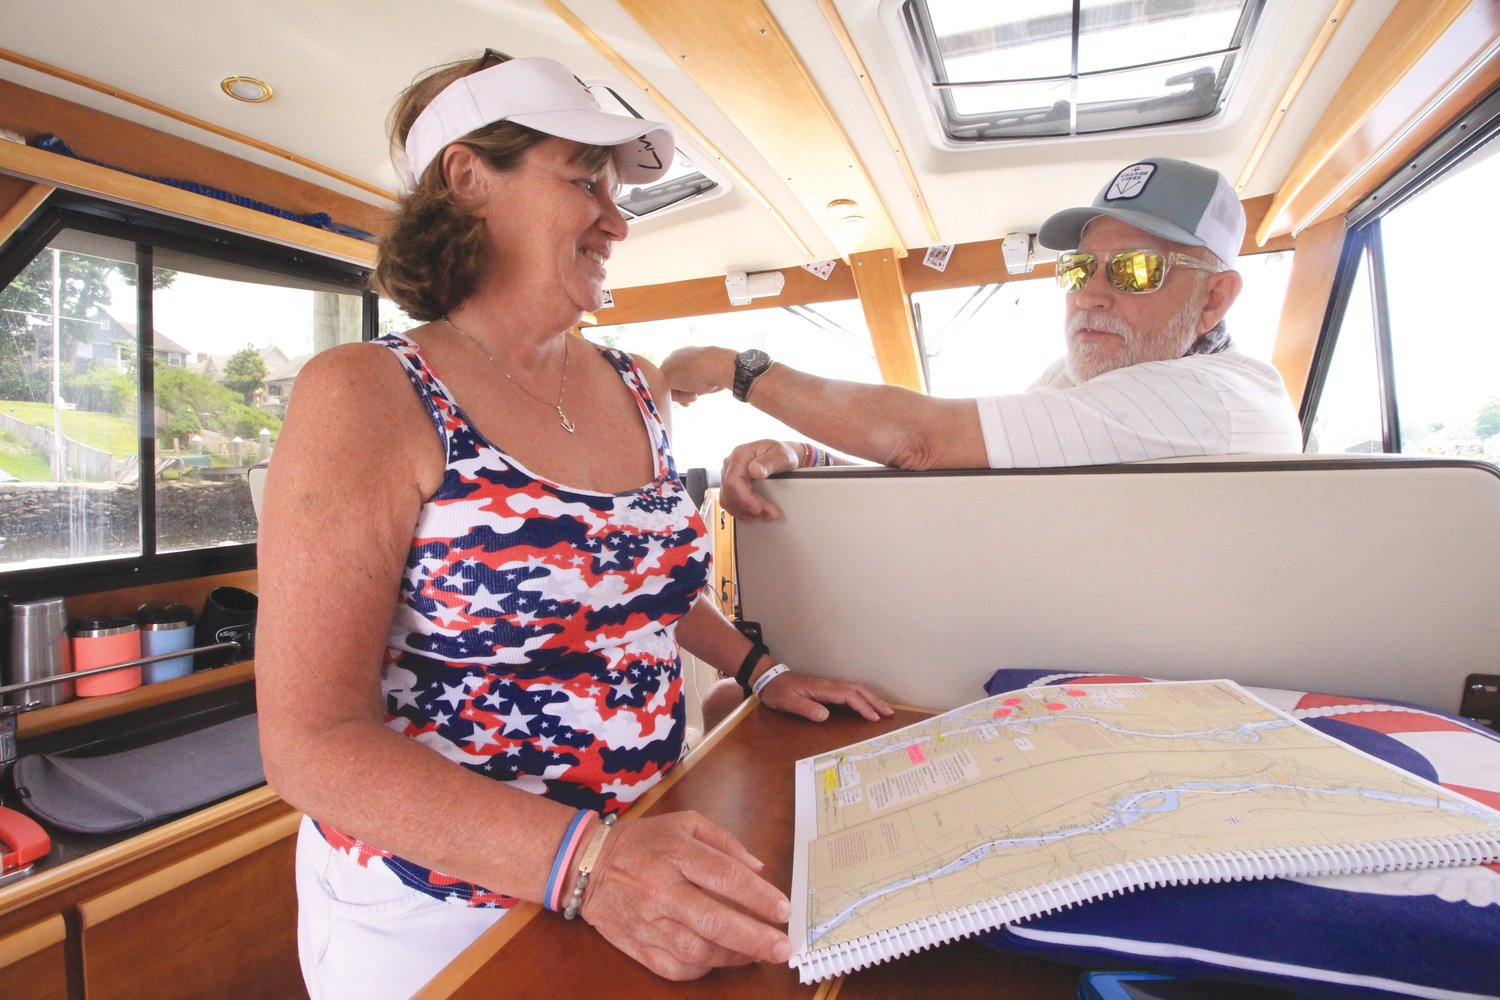 CLOSE QUARTERS: Every square inch of the boat has a purpose. There’s even a place for Marie’s spreadsheets and charts that have been carefully highlighted with stickers to remind the two of them places and people they want to see on their trip.